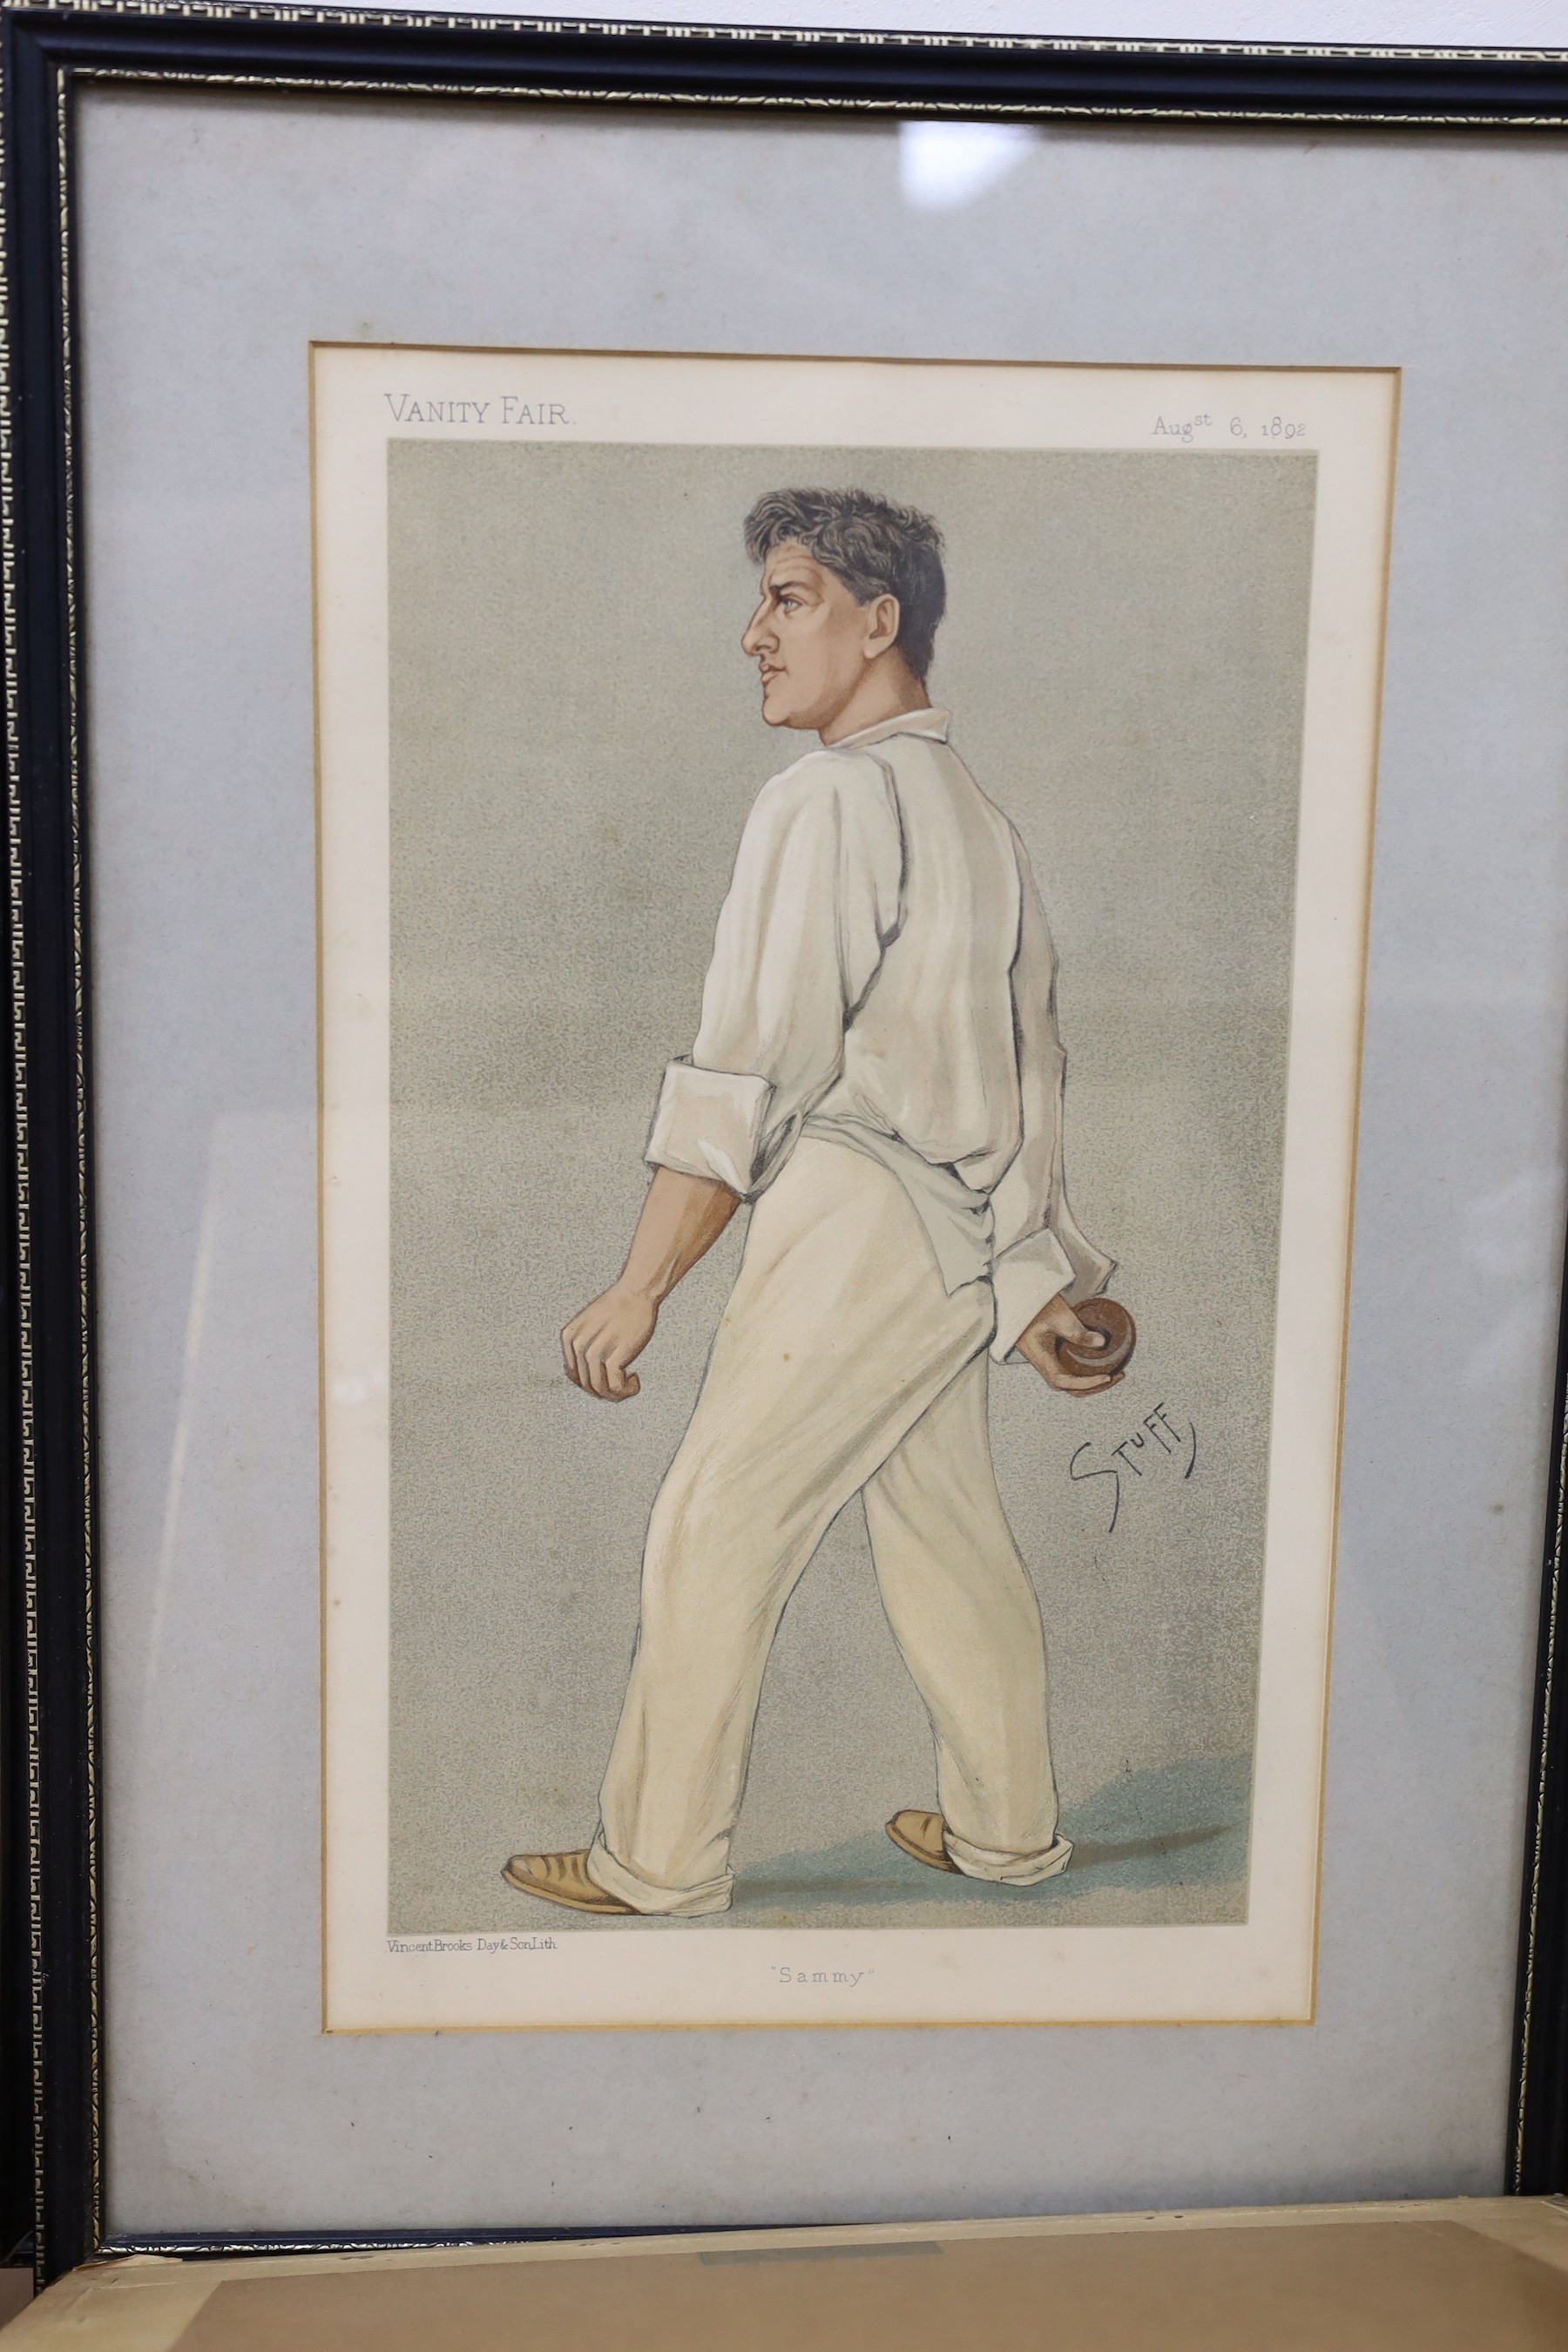 Spy (Vanity Fair), four prints of cricketers, 'July 1901', 'The Champion County', 'Plum' and 'Sammy', largest 40 x 26cm